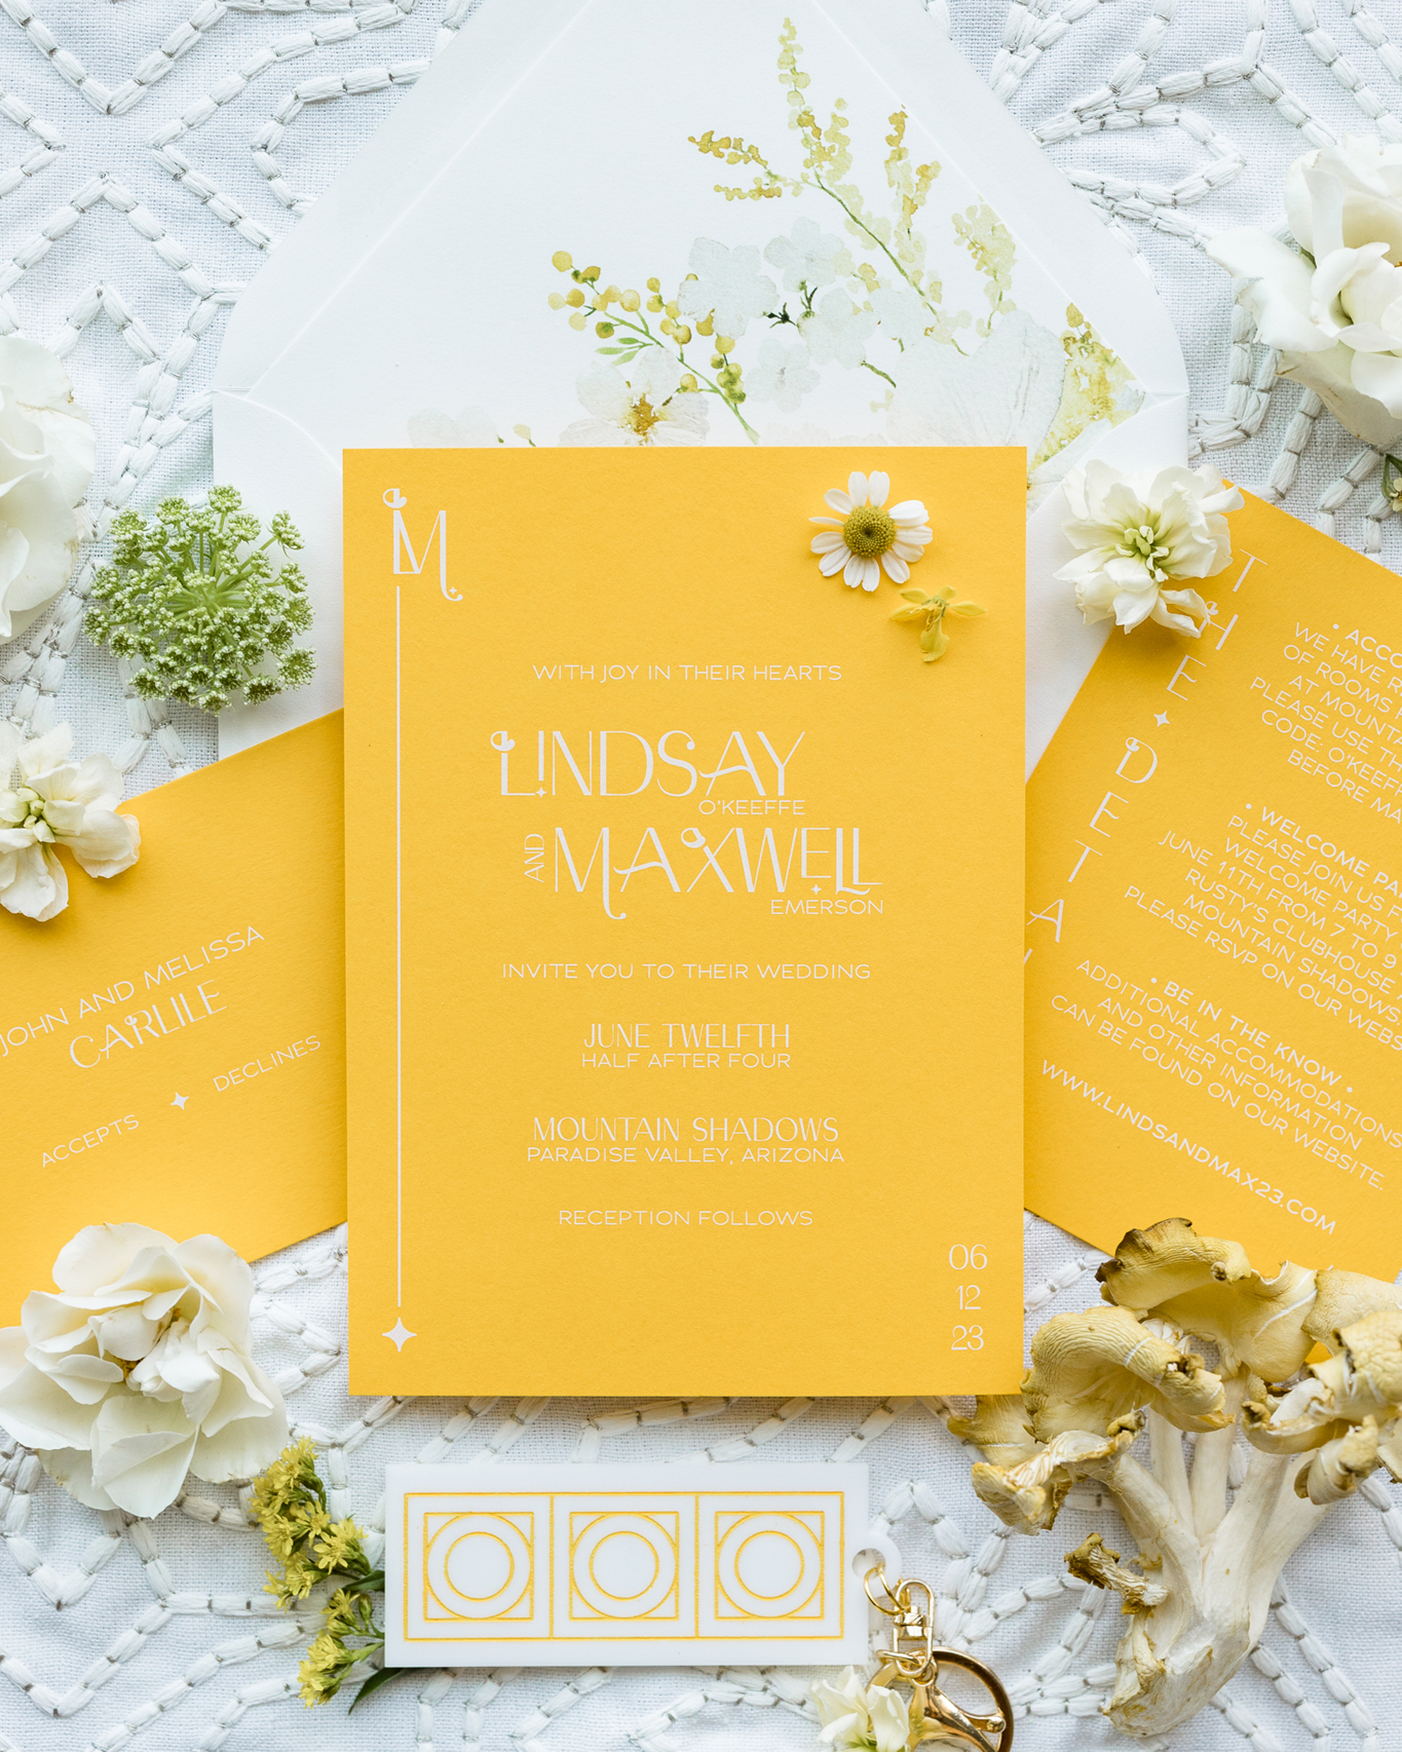 golden yellow wedding invitation with white ink printing in a mid-century modern design